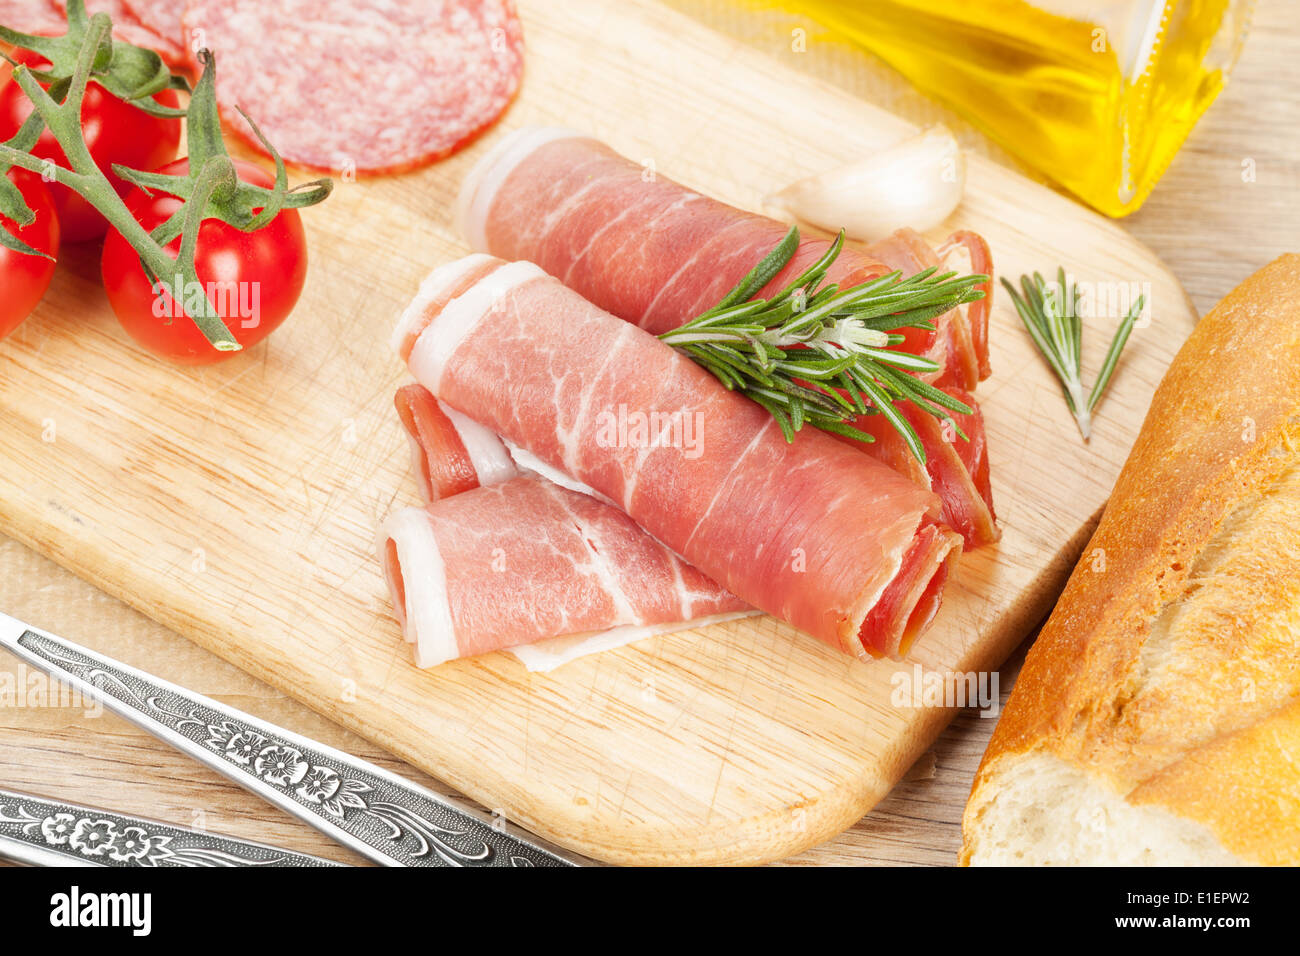 Prosciutto, bread, vegetables and spices on wooden table Stock Photo